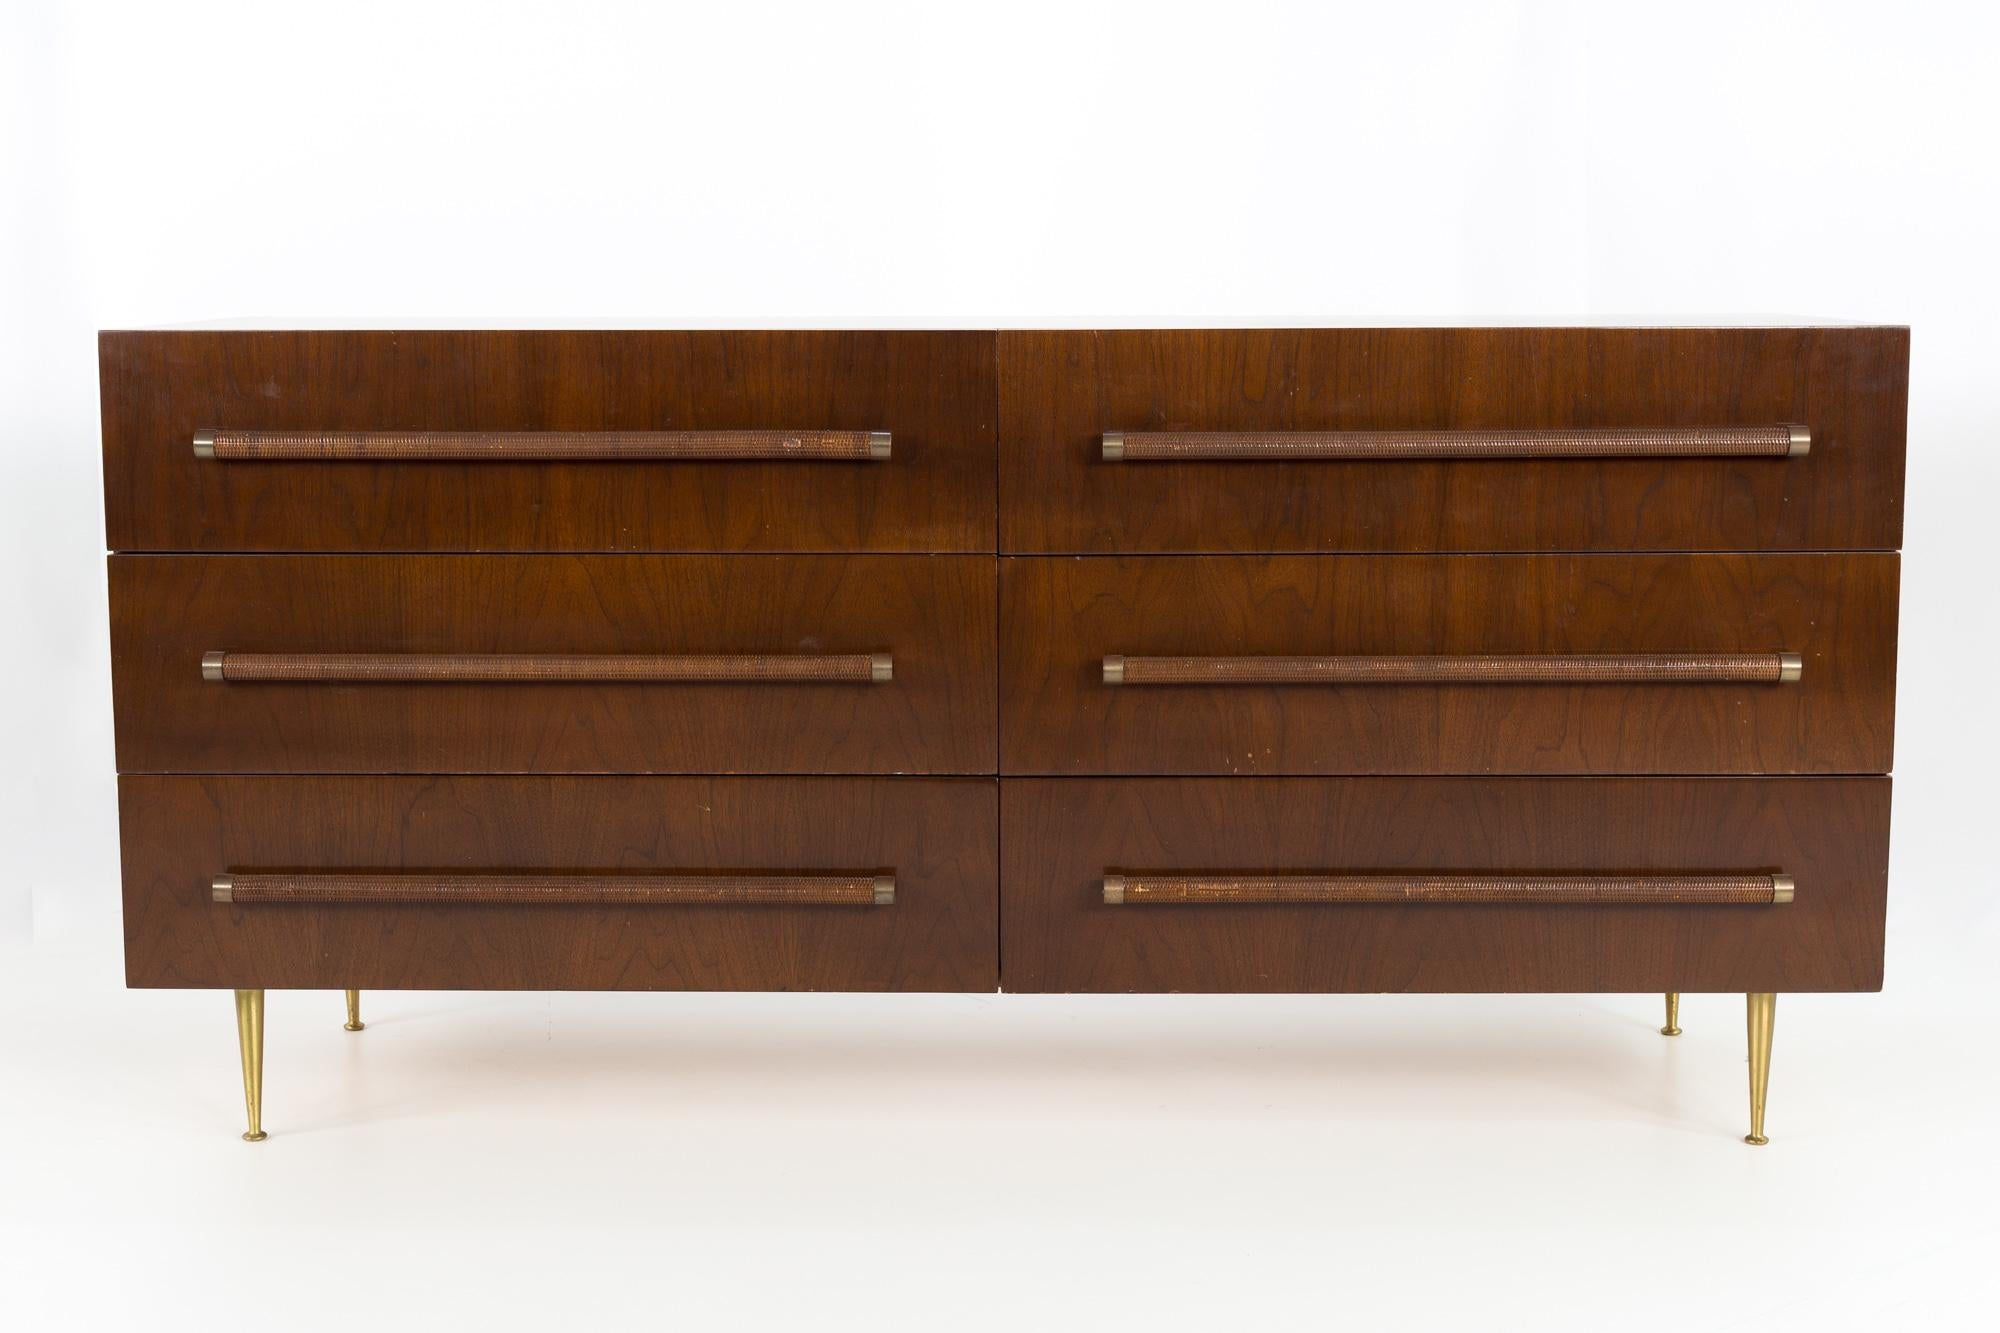 T.H. Robsjohn-Gibbings for Widdicomb Mid Century mahogany brass and wicker long lowboy dresser
Measures: 68 wide x 22 deep x 32.25 inches high

This price includes getting this piece in what we call restored vintage condition. That means the piece